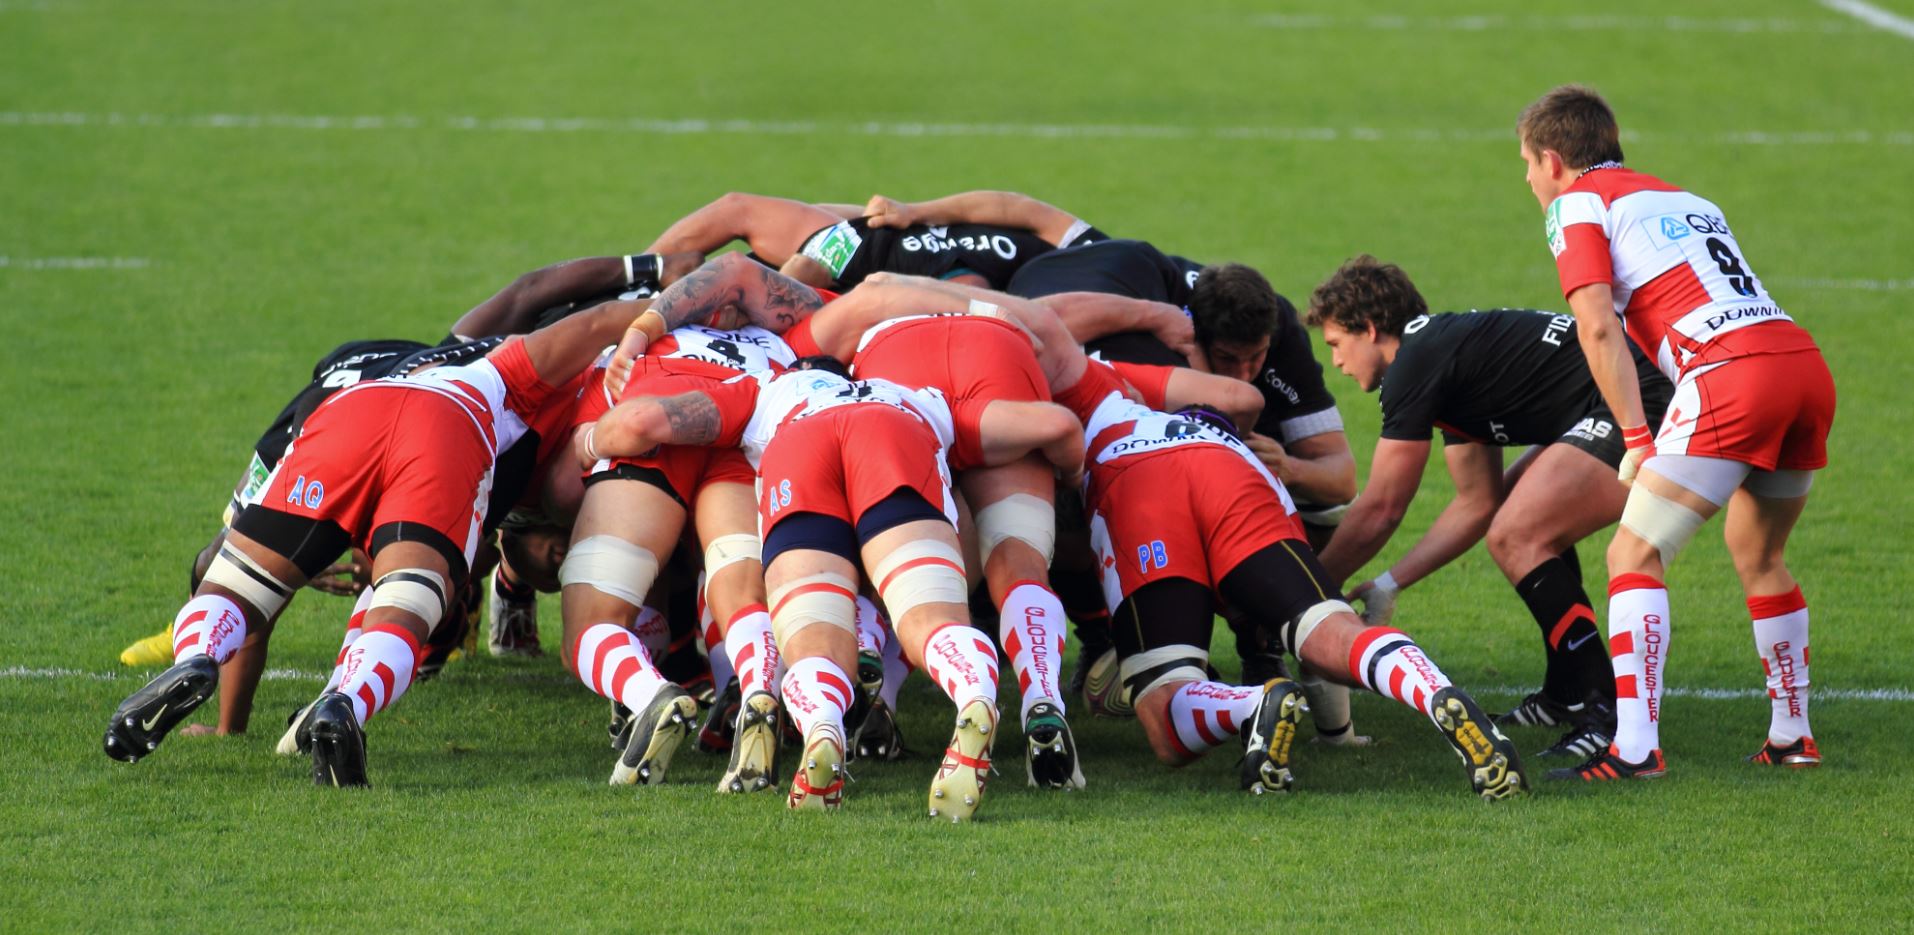 How to play rugby every bit of useful information about its rules